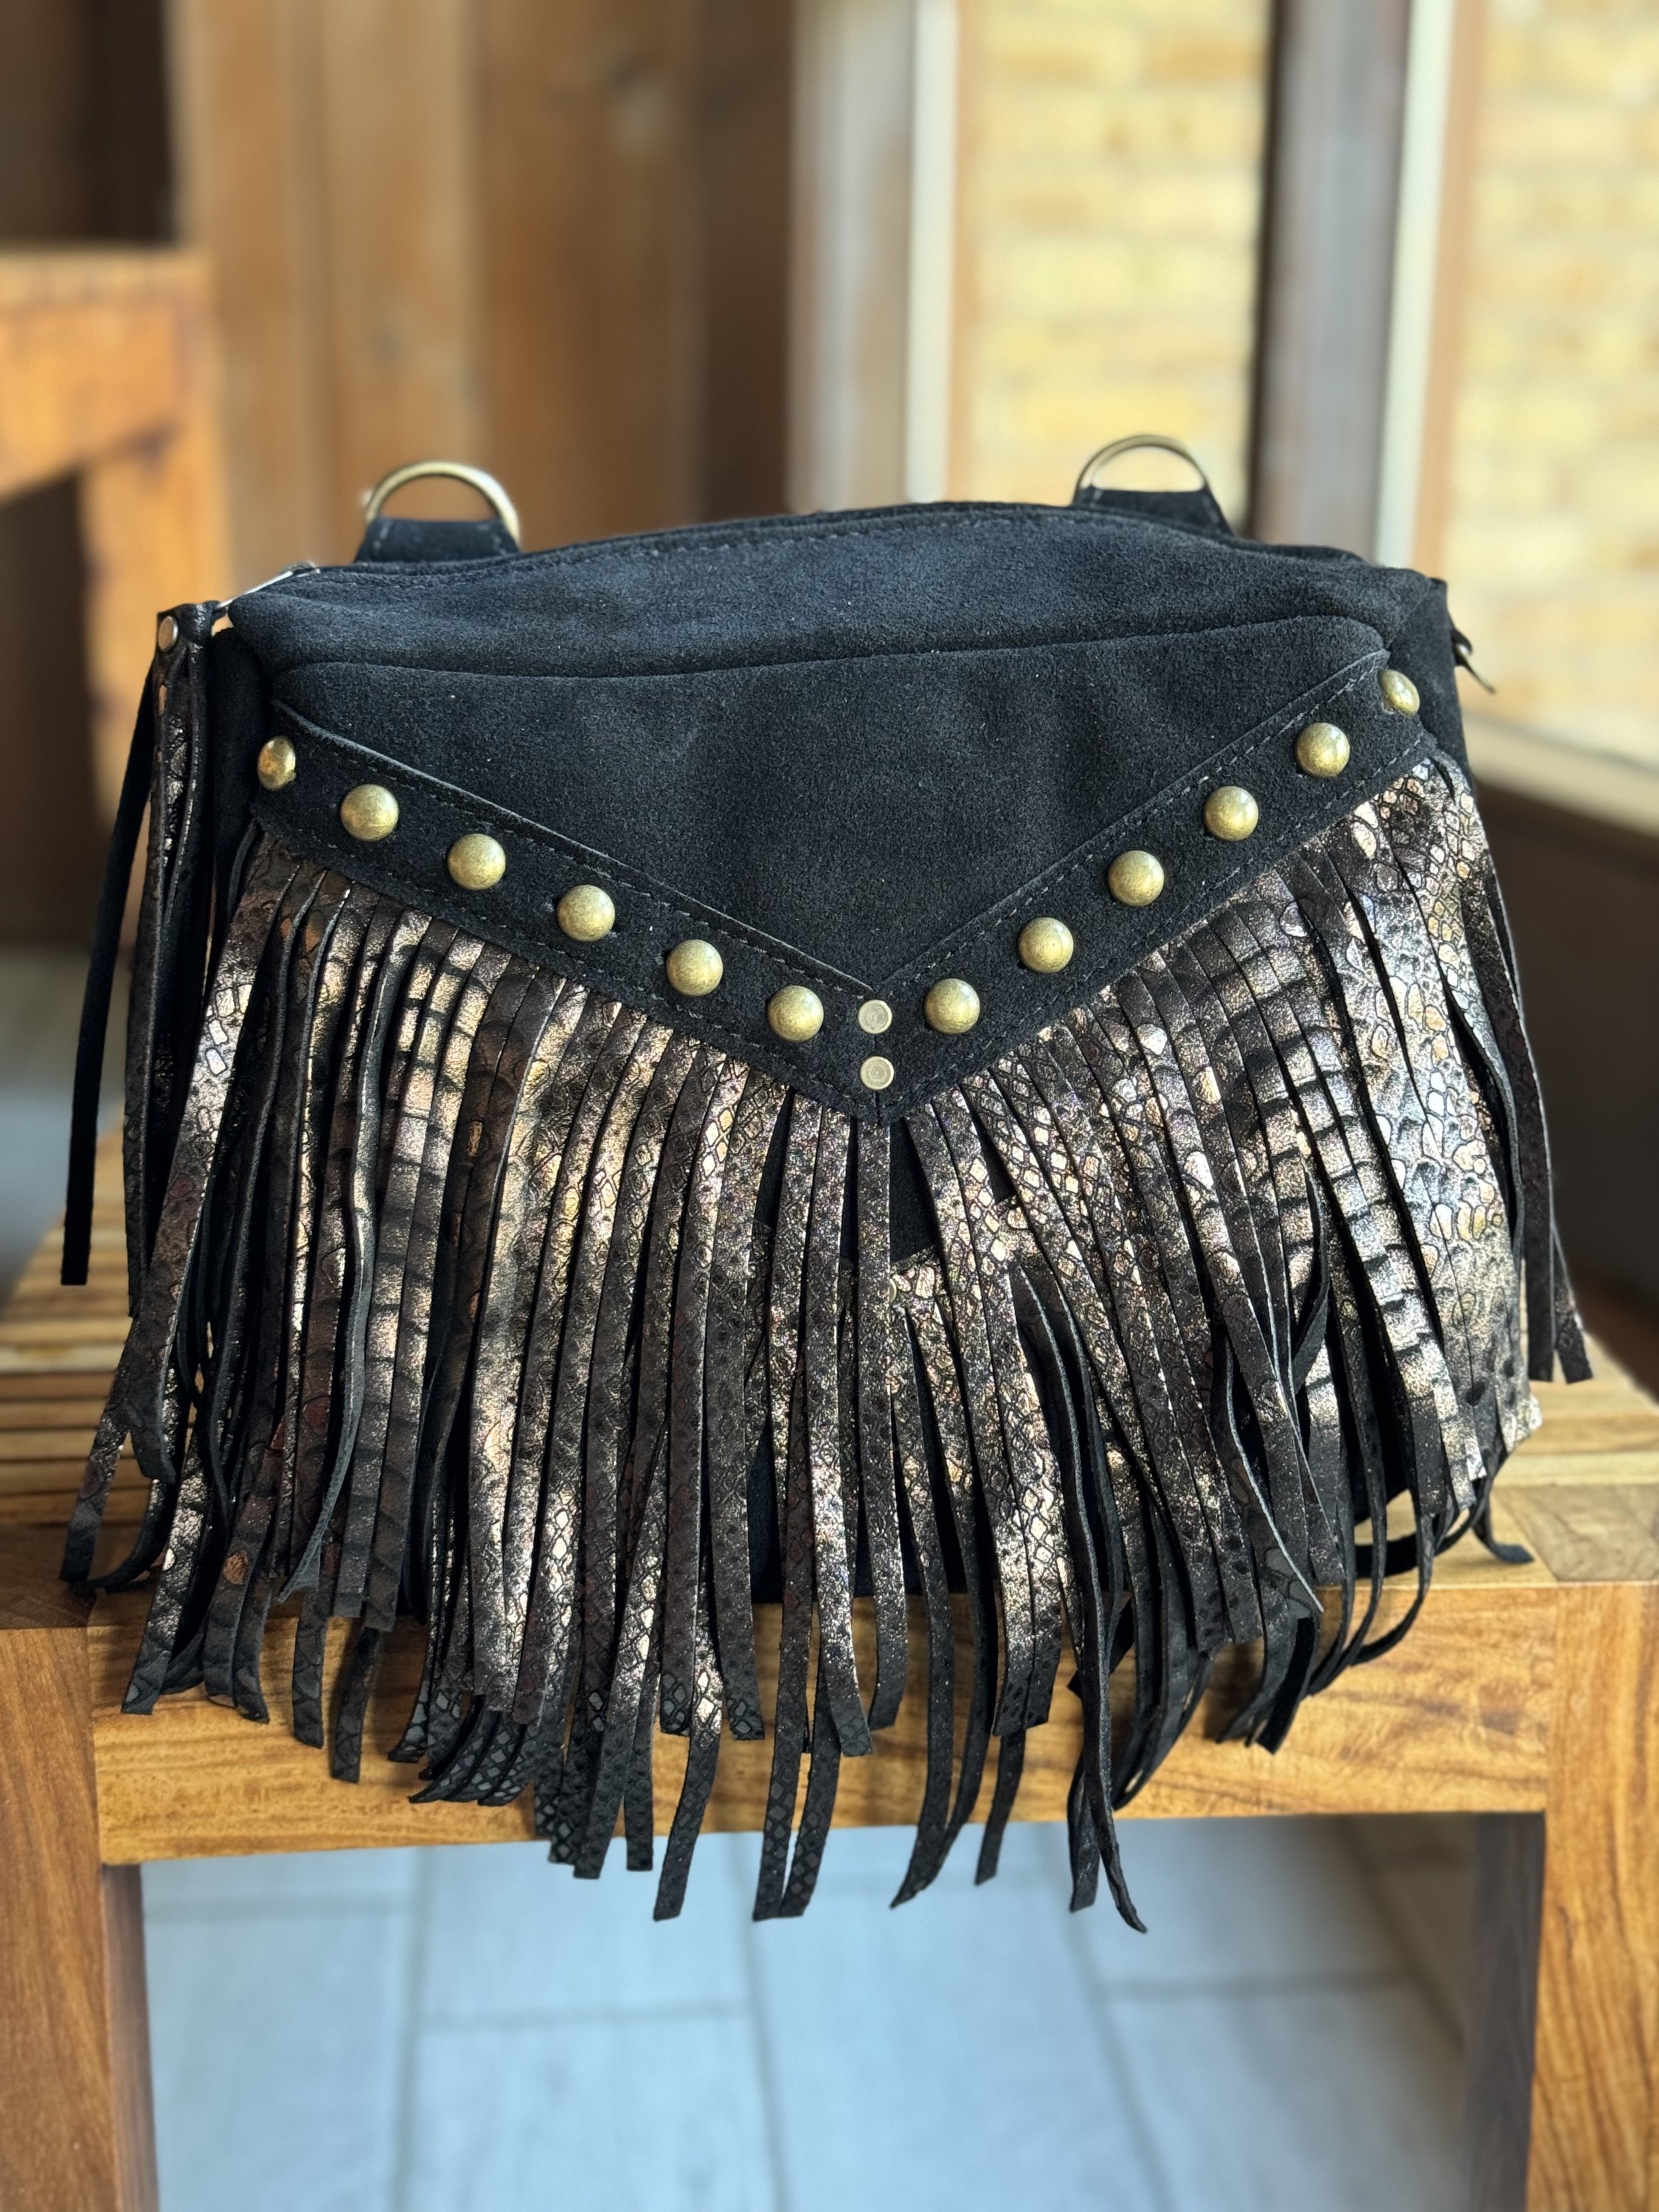 Black suede and Black Python fringe leather, Studs, Antique Brass hardware, Flair D Ring - Mini Melissa Convertible Bag